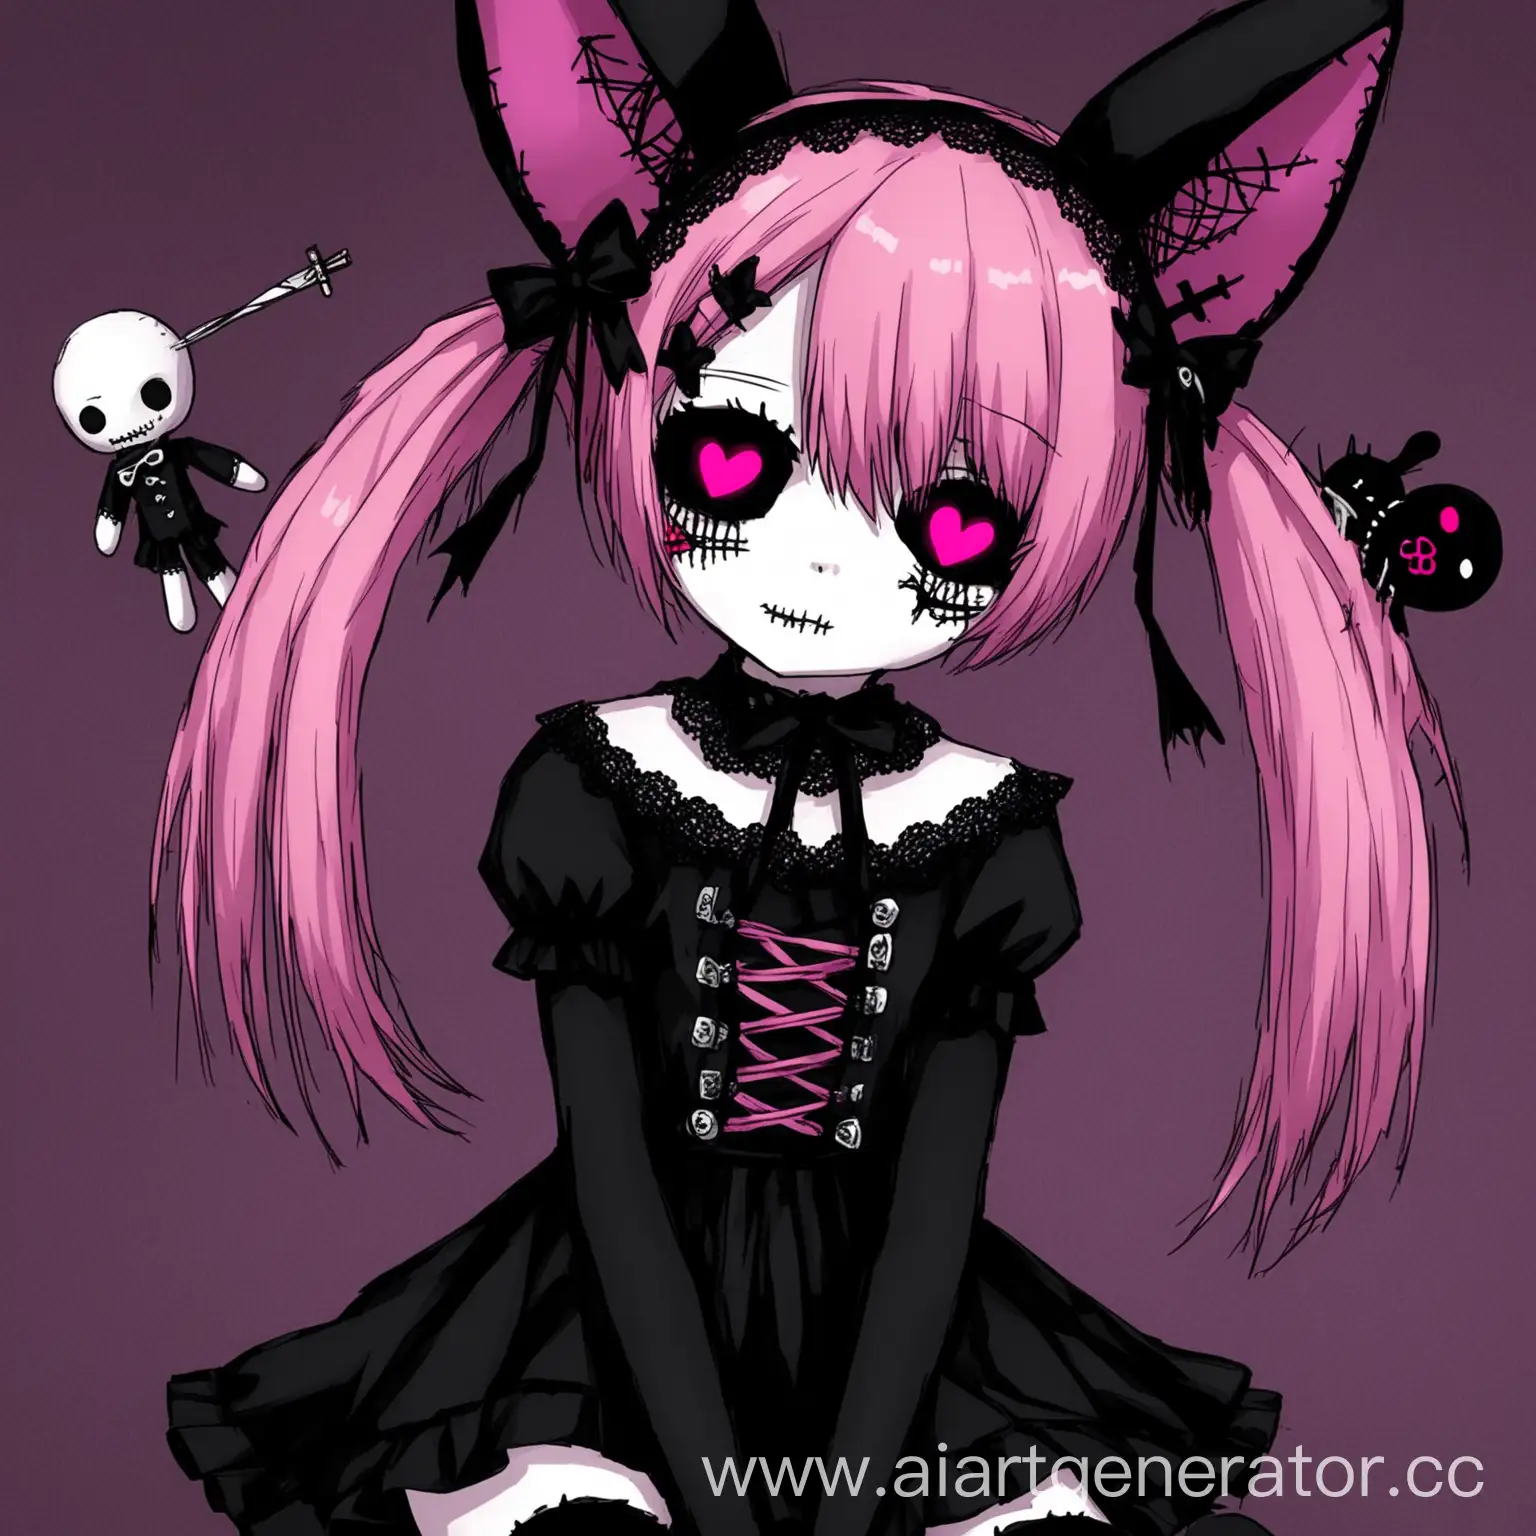 Anime-Boy-with-Voodoo-Doll-and-Girl-in-Black-Tights-and-Pink-Hair